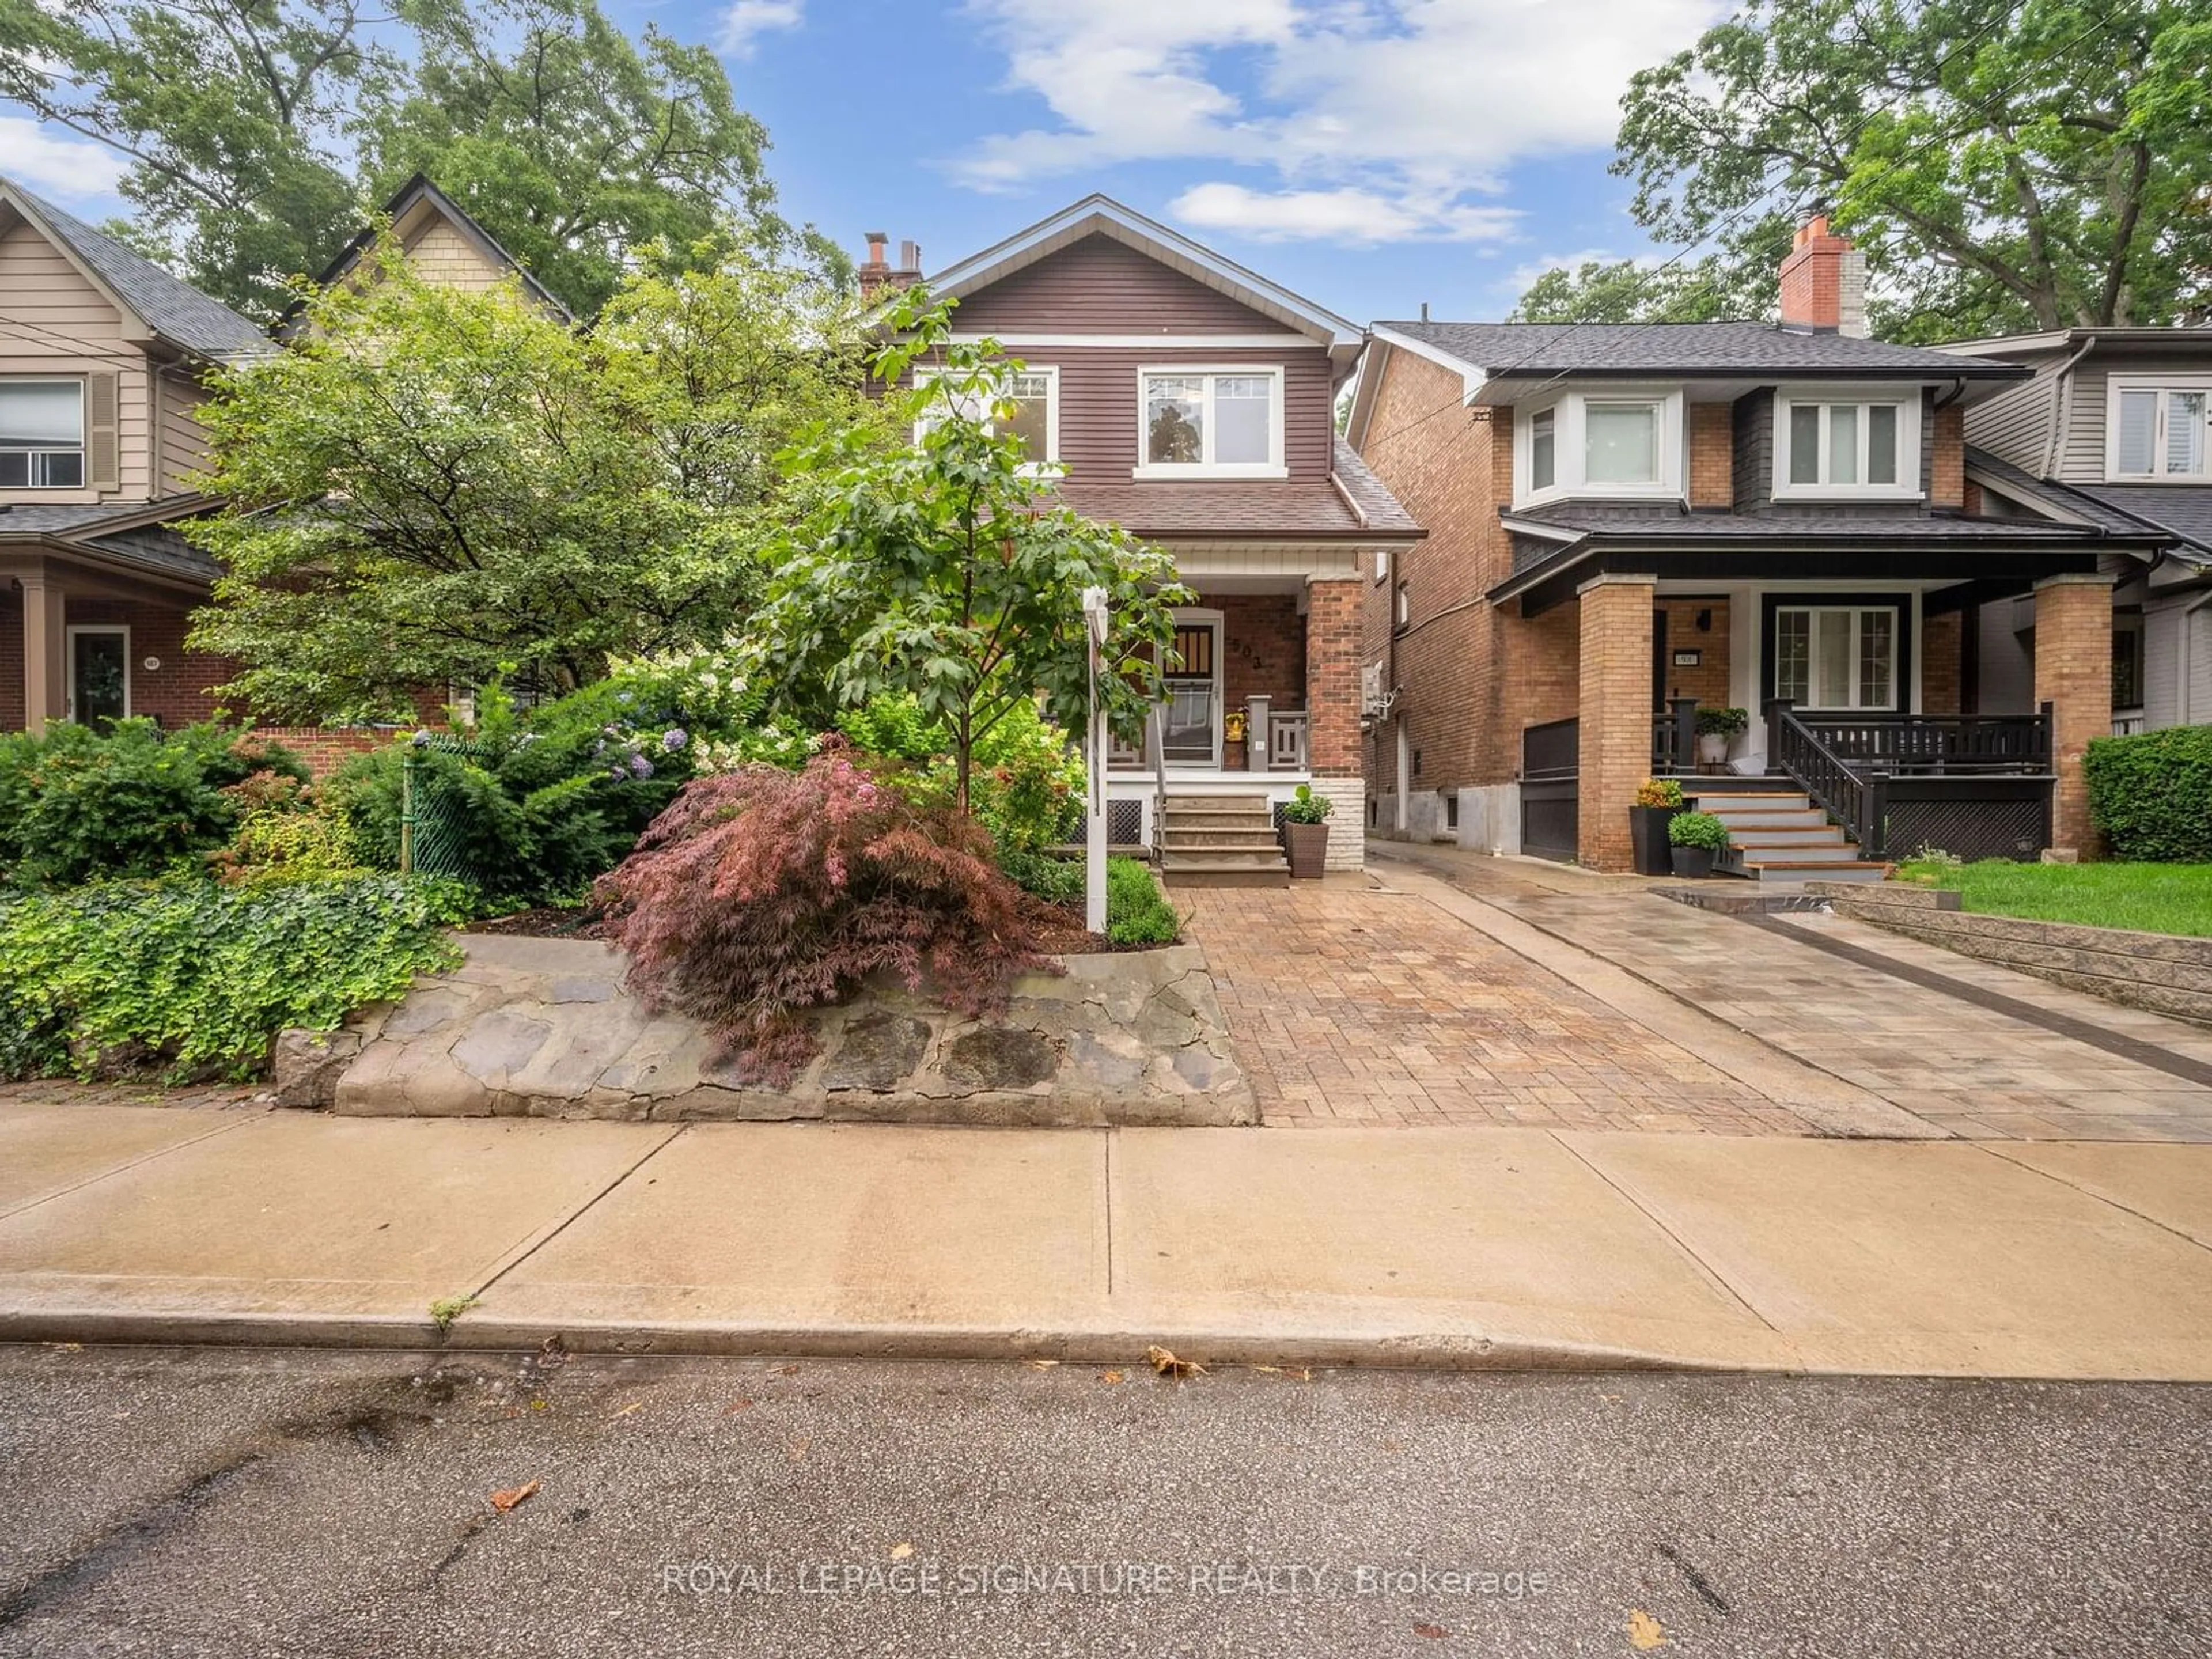 Frontside or backside of a home for 503 Windermere Ave, Toronto Ontario M6S 3L5